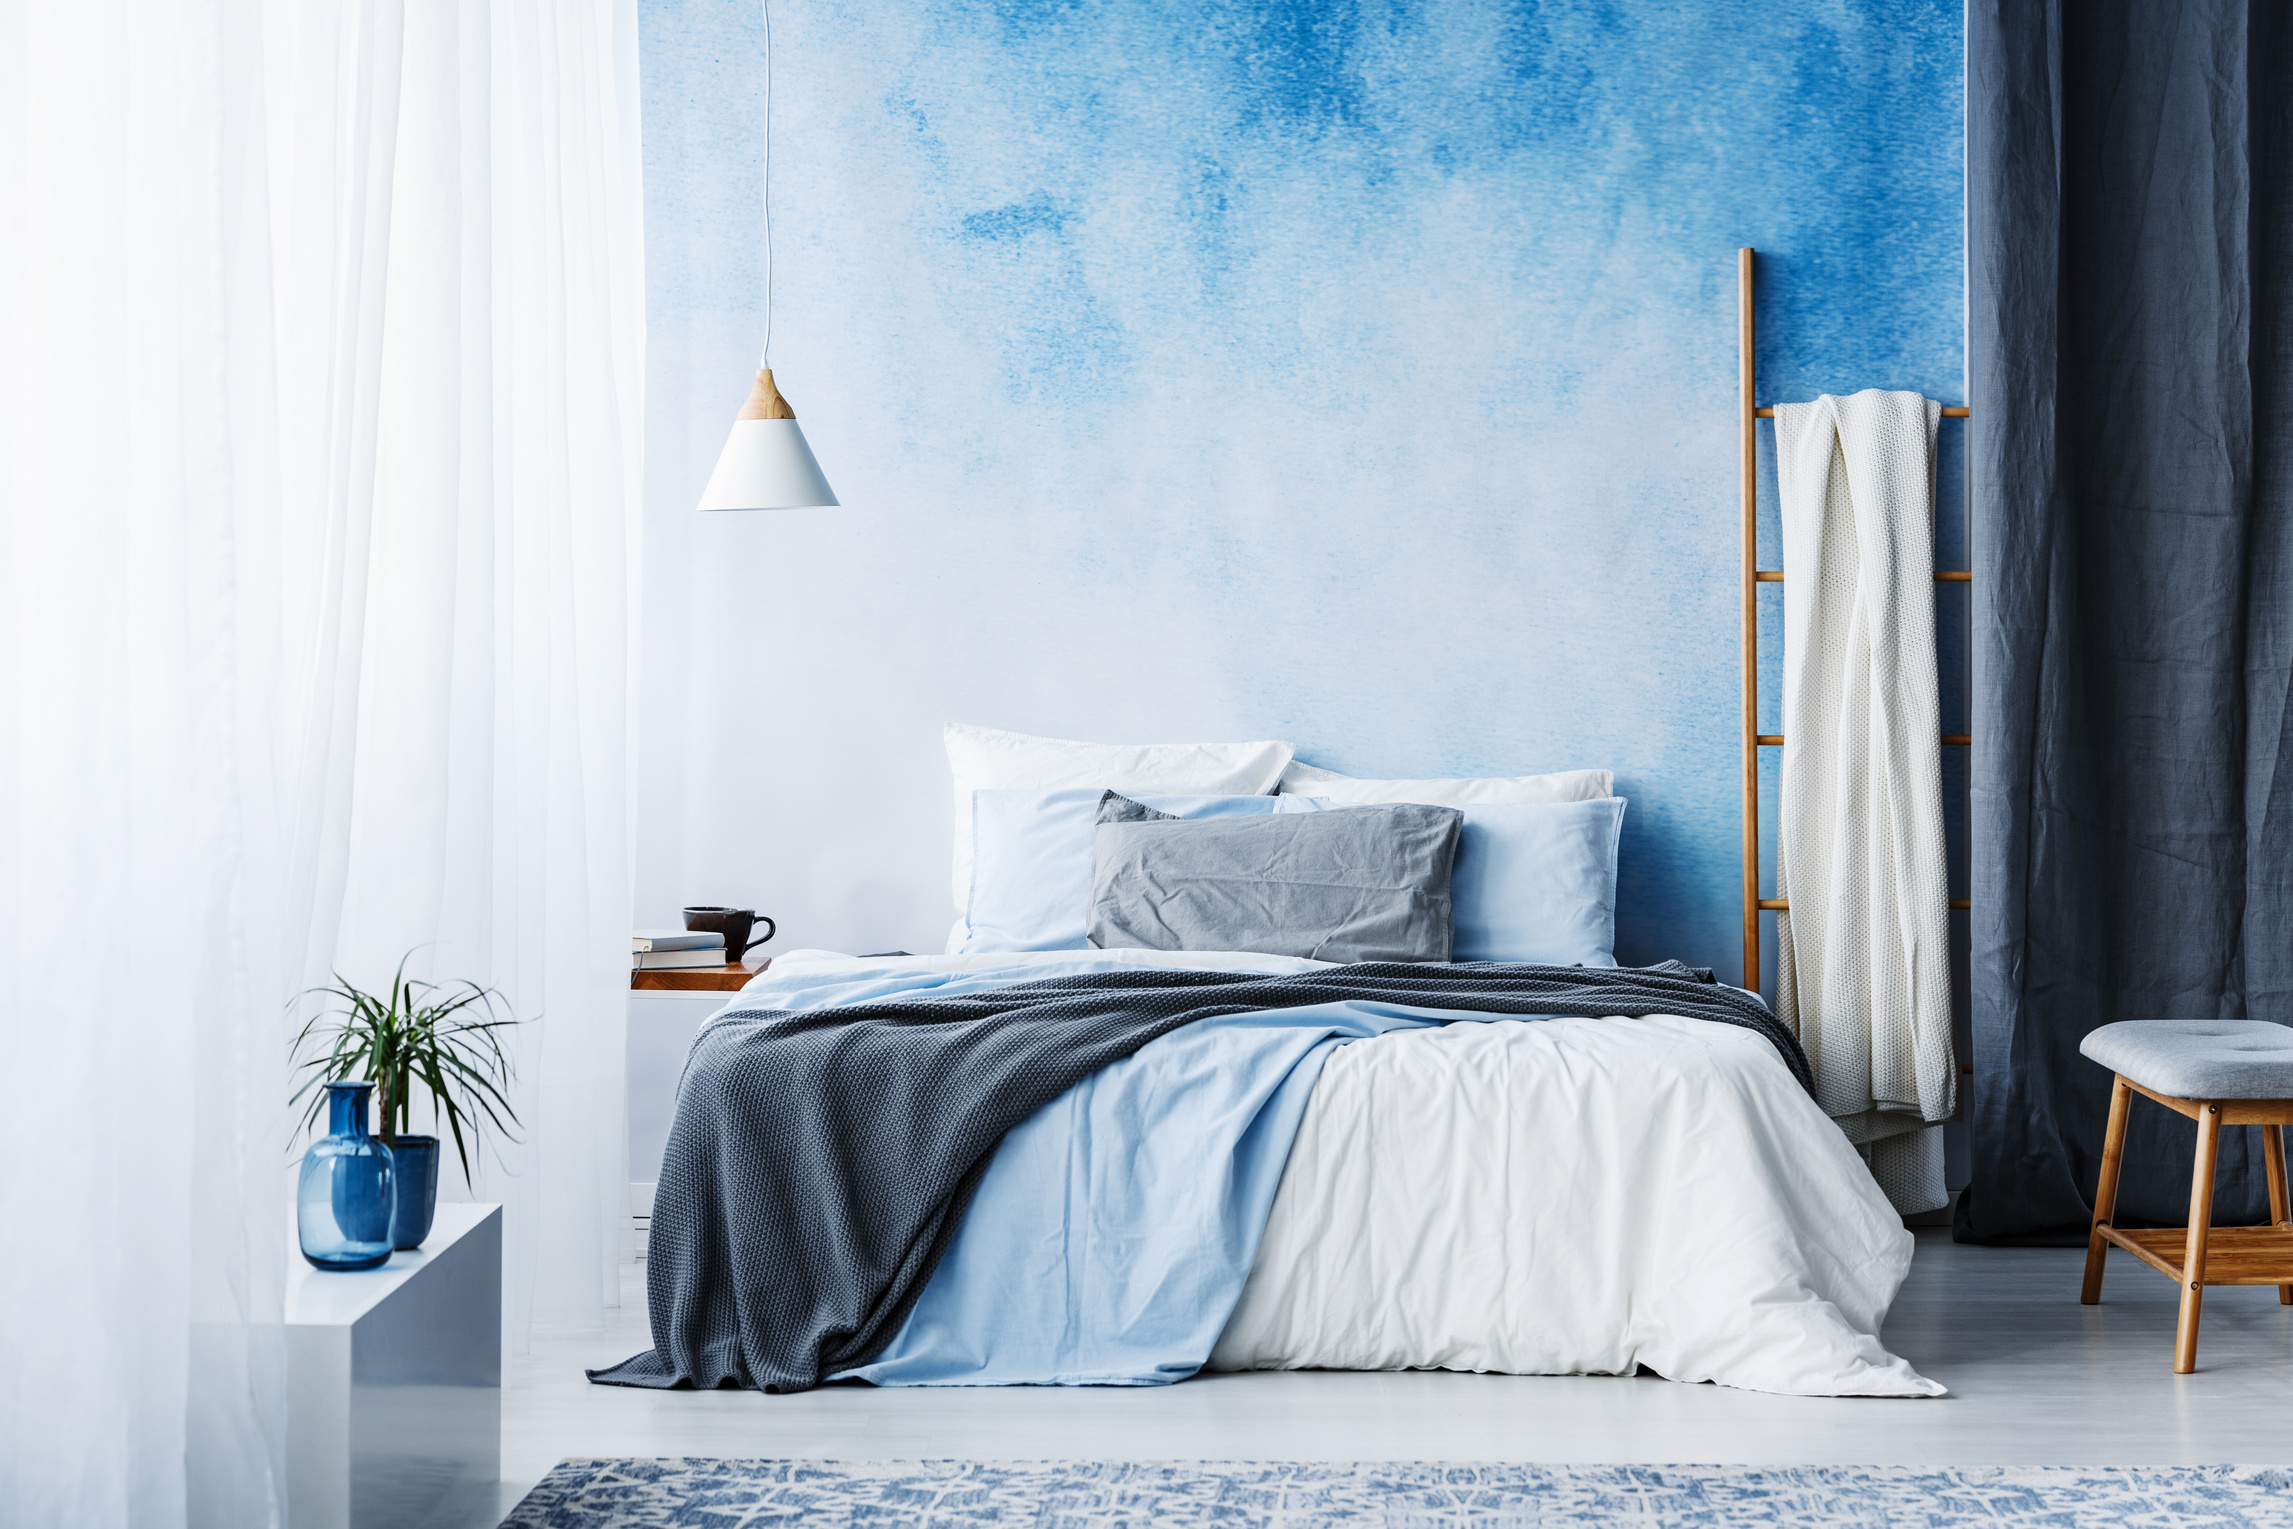 Grey and blue bedding on bed in spacious bedroom interior with ladder and plant